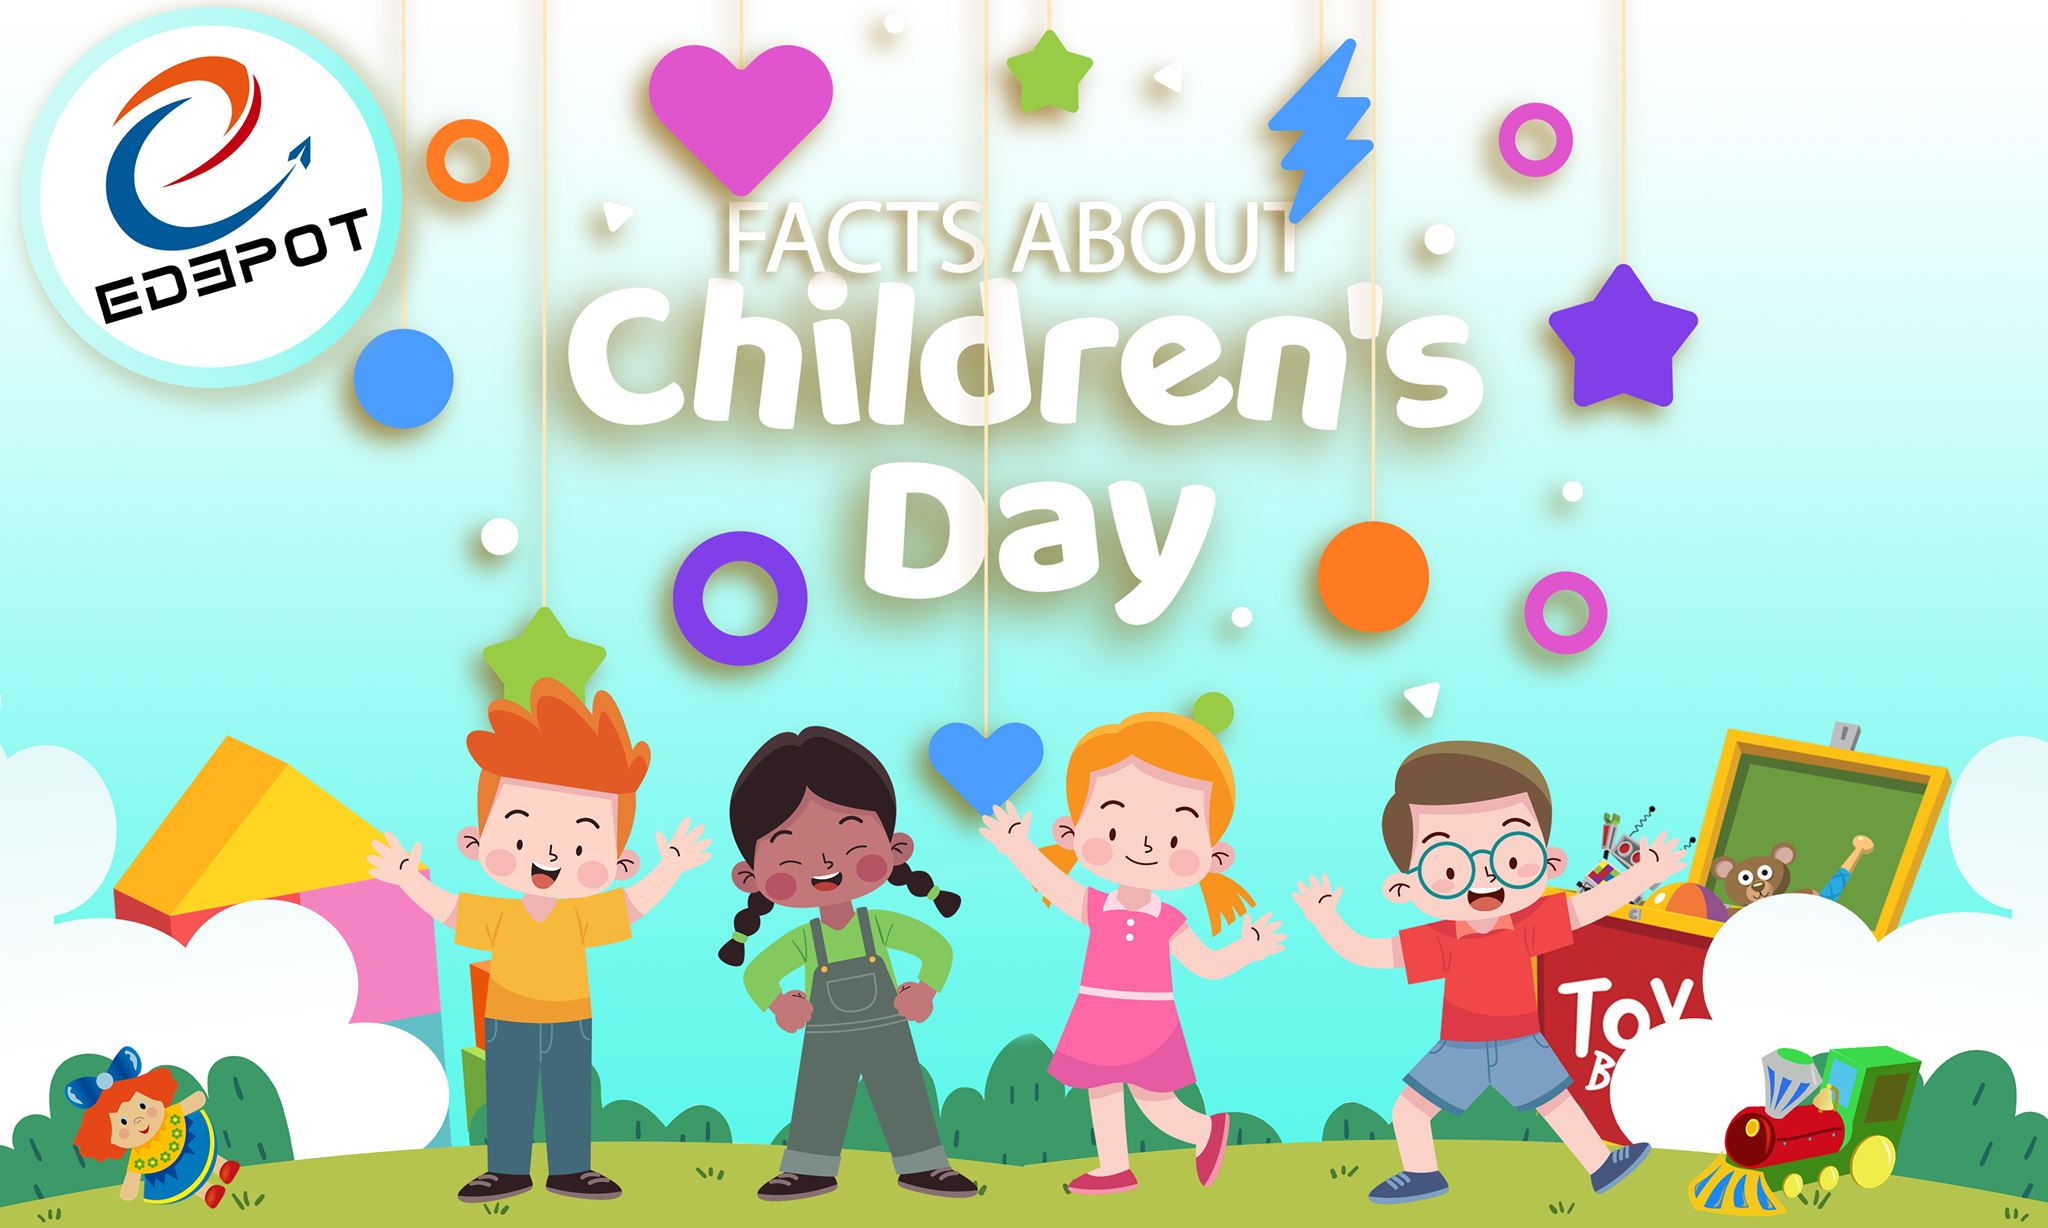 FACTS ABOUT CHILDREN’S DAY - eDepot | Wholesale Everyday Items Supplier